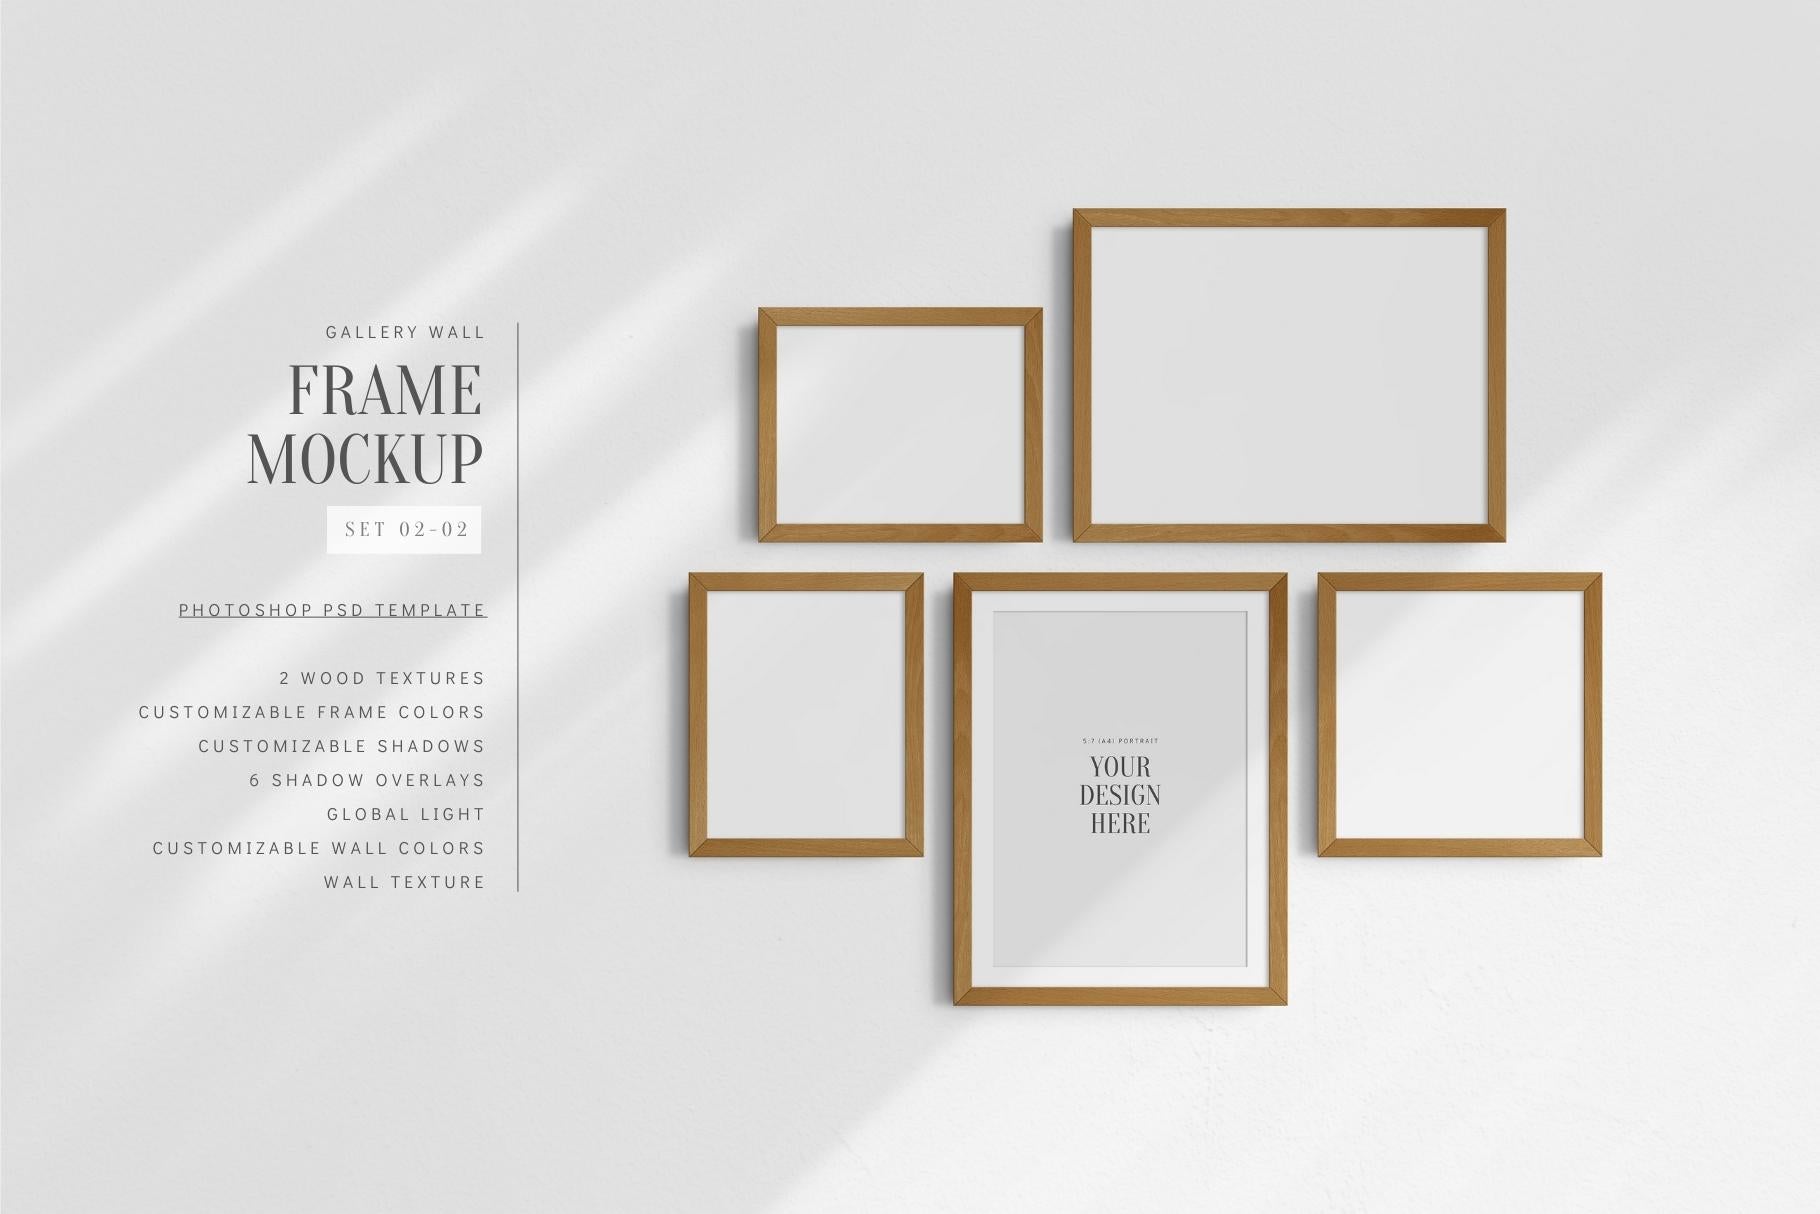 Free and customizable frames templates